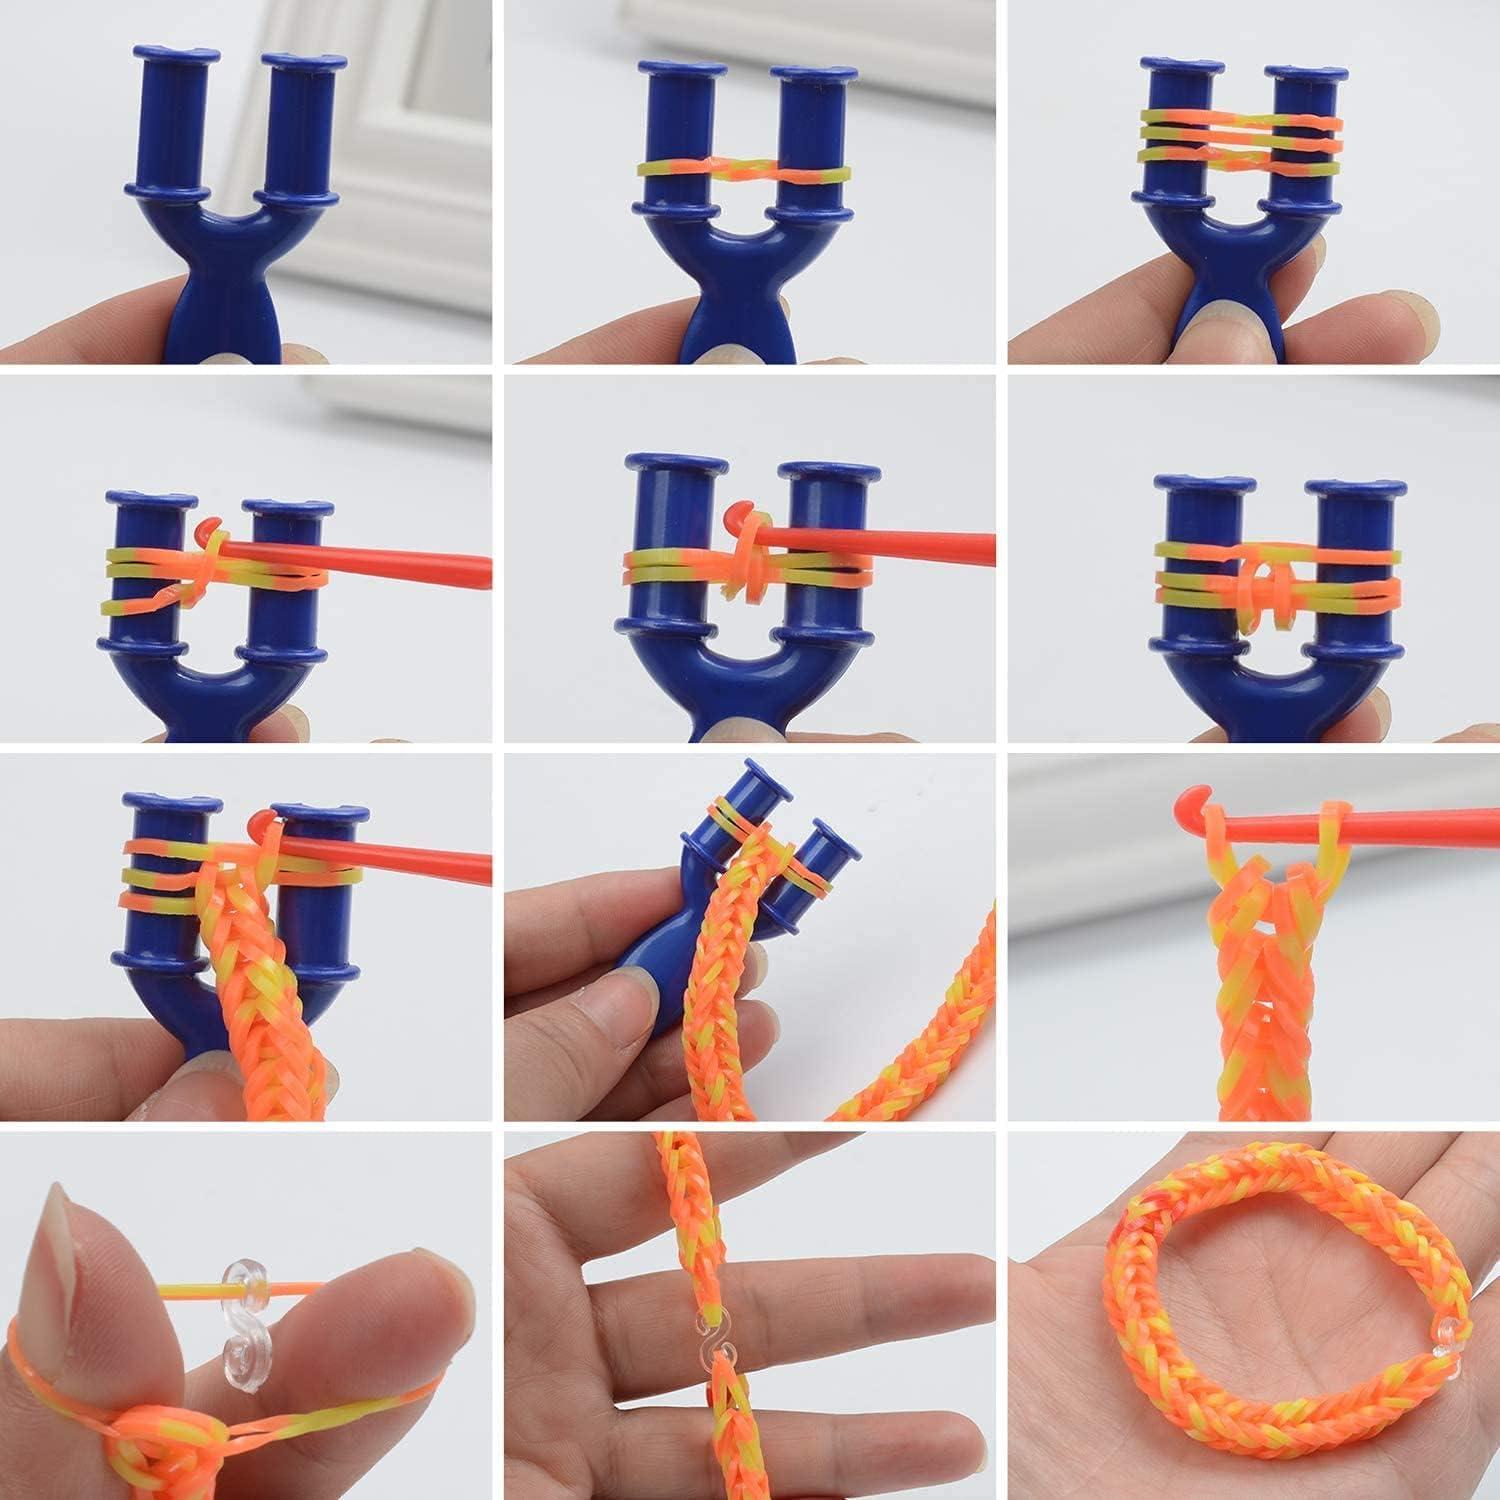 How to Make Friendship Bracelets with Rubber Bands